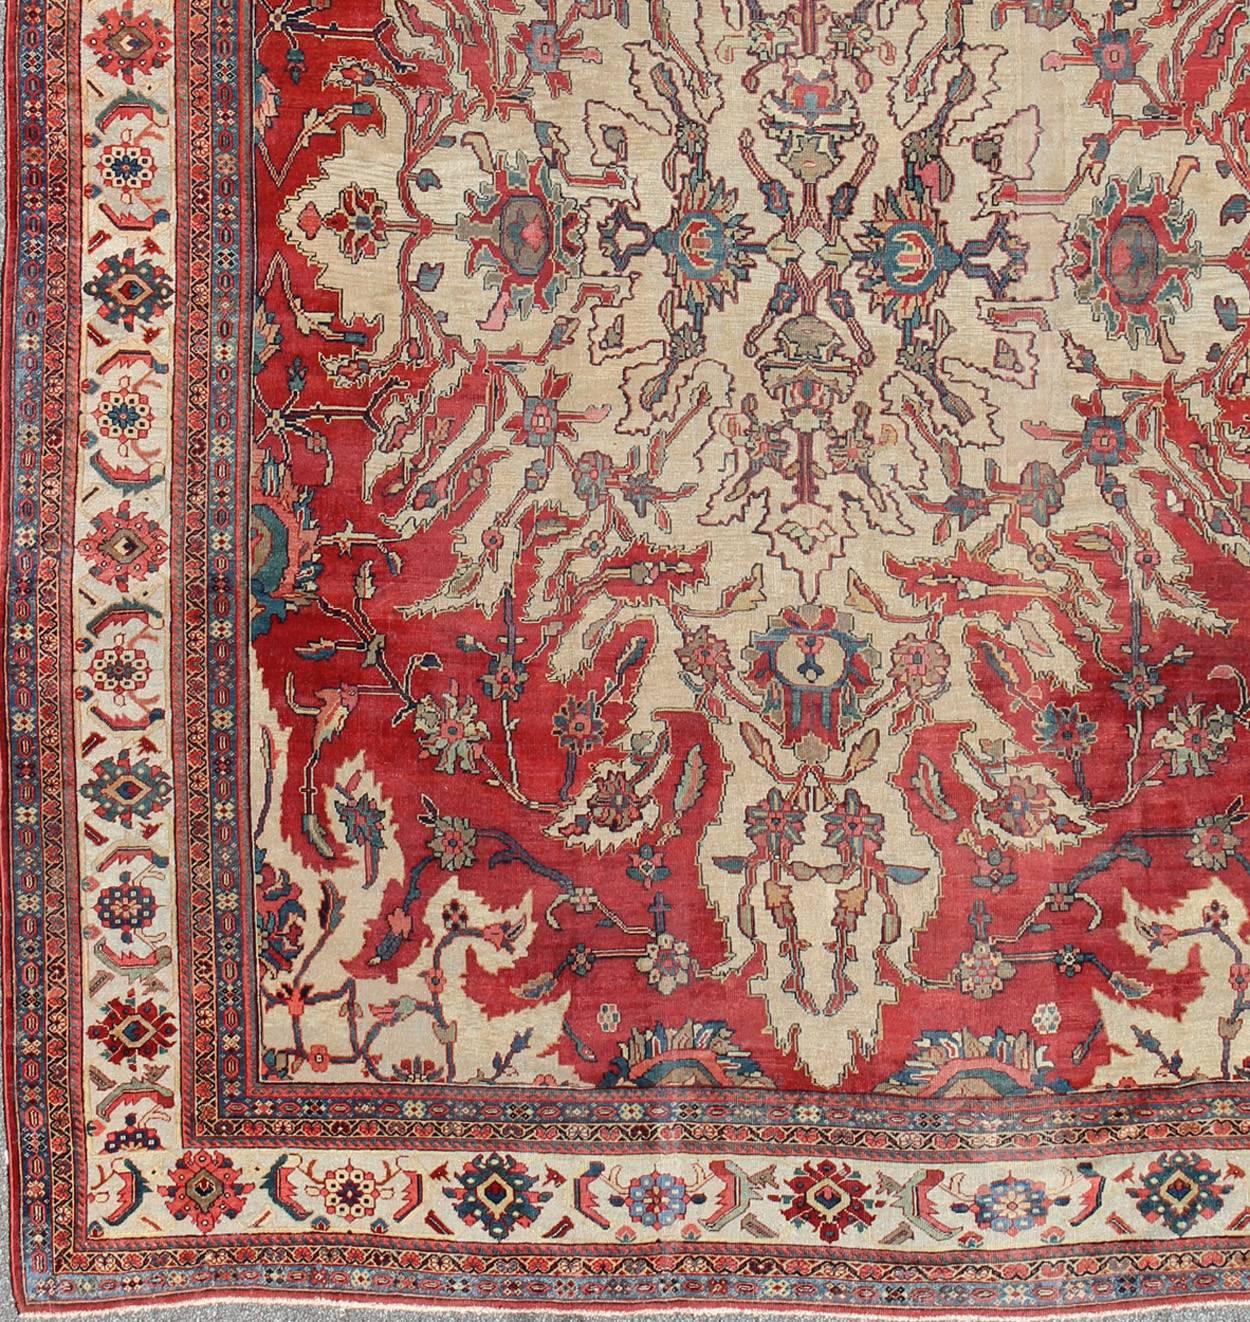 Large Antique Persian Sultanabad rug, rug E-1209, country of origin / type: Iran / Sultanabad, circa Early-20th Century.

Measures: 12'2 x 16'

This beautiful antique Persian Sultanabad carpet draws from nature's designs for its inspiration. The